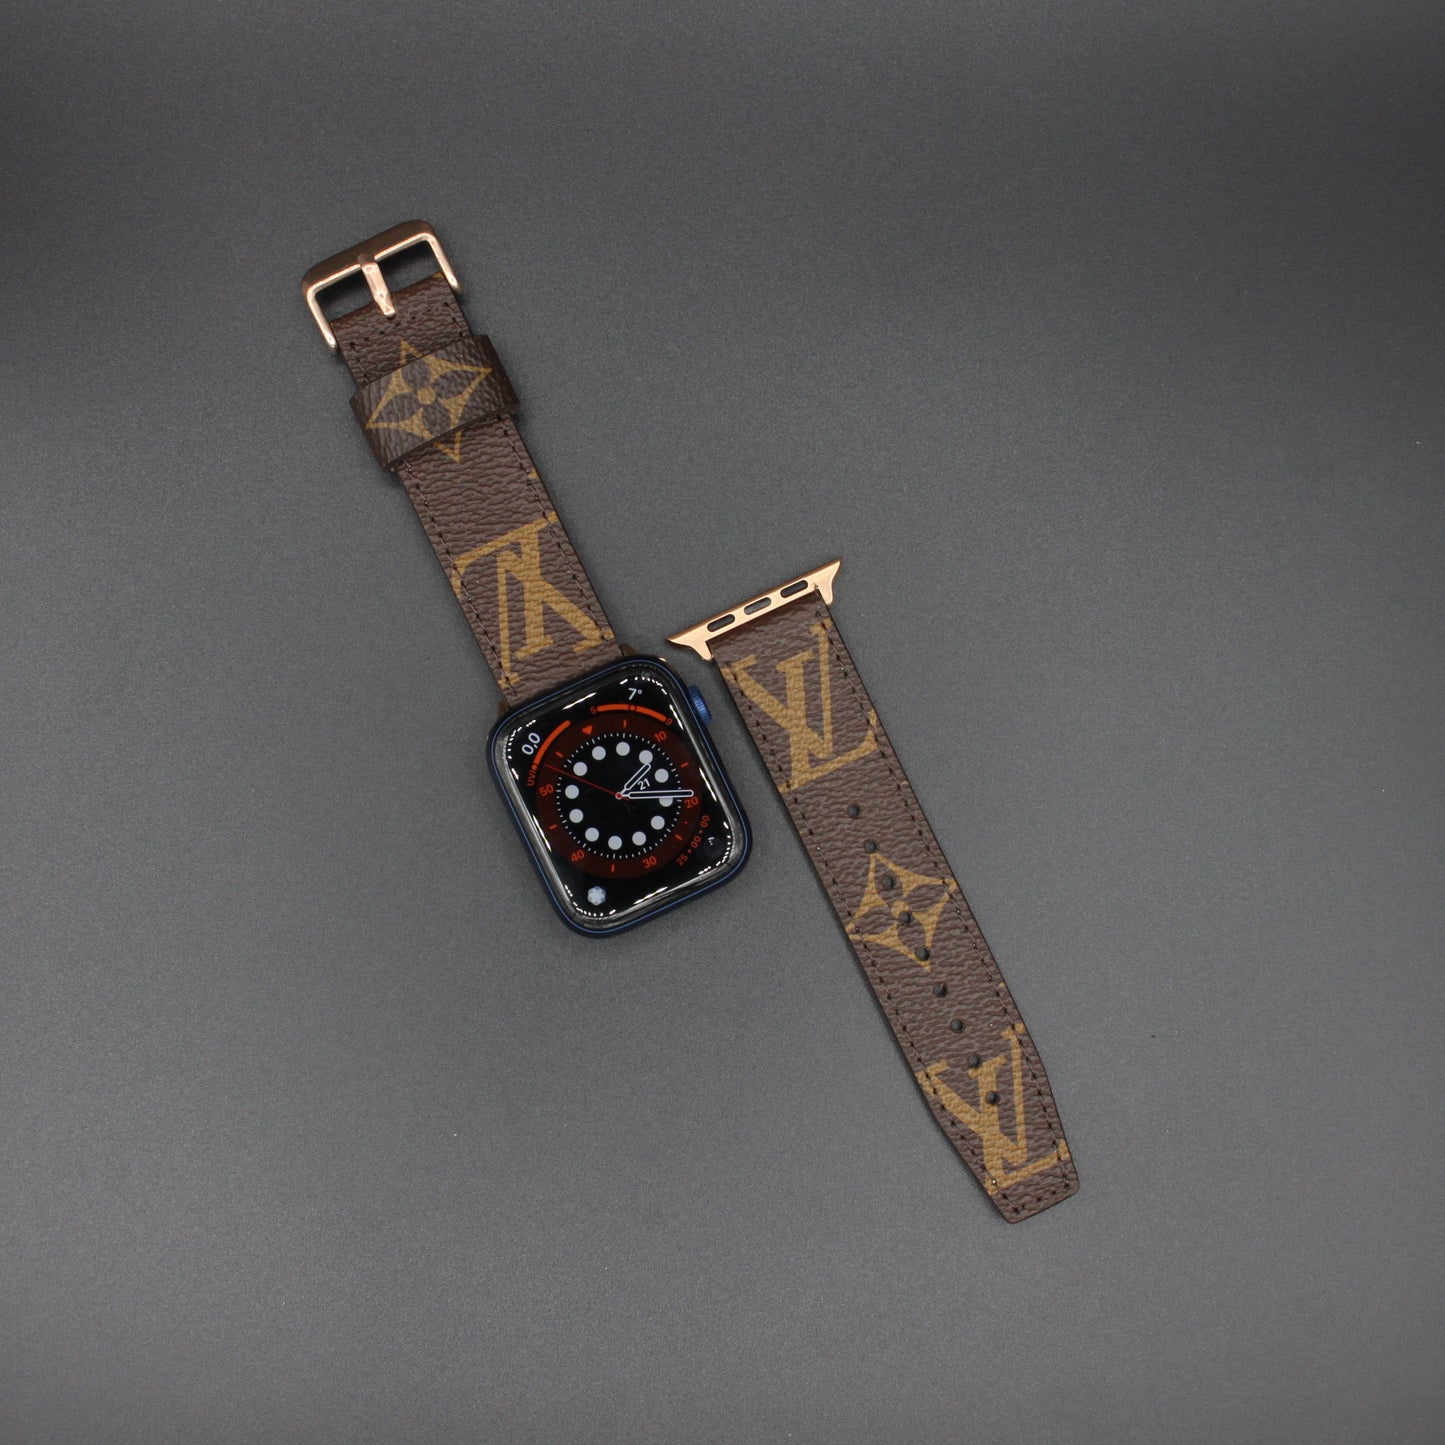 44mm apple watch band for women lv